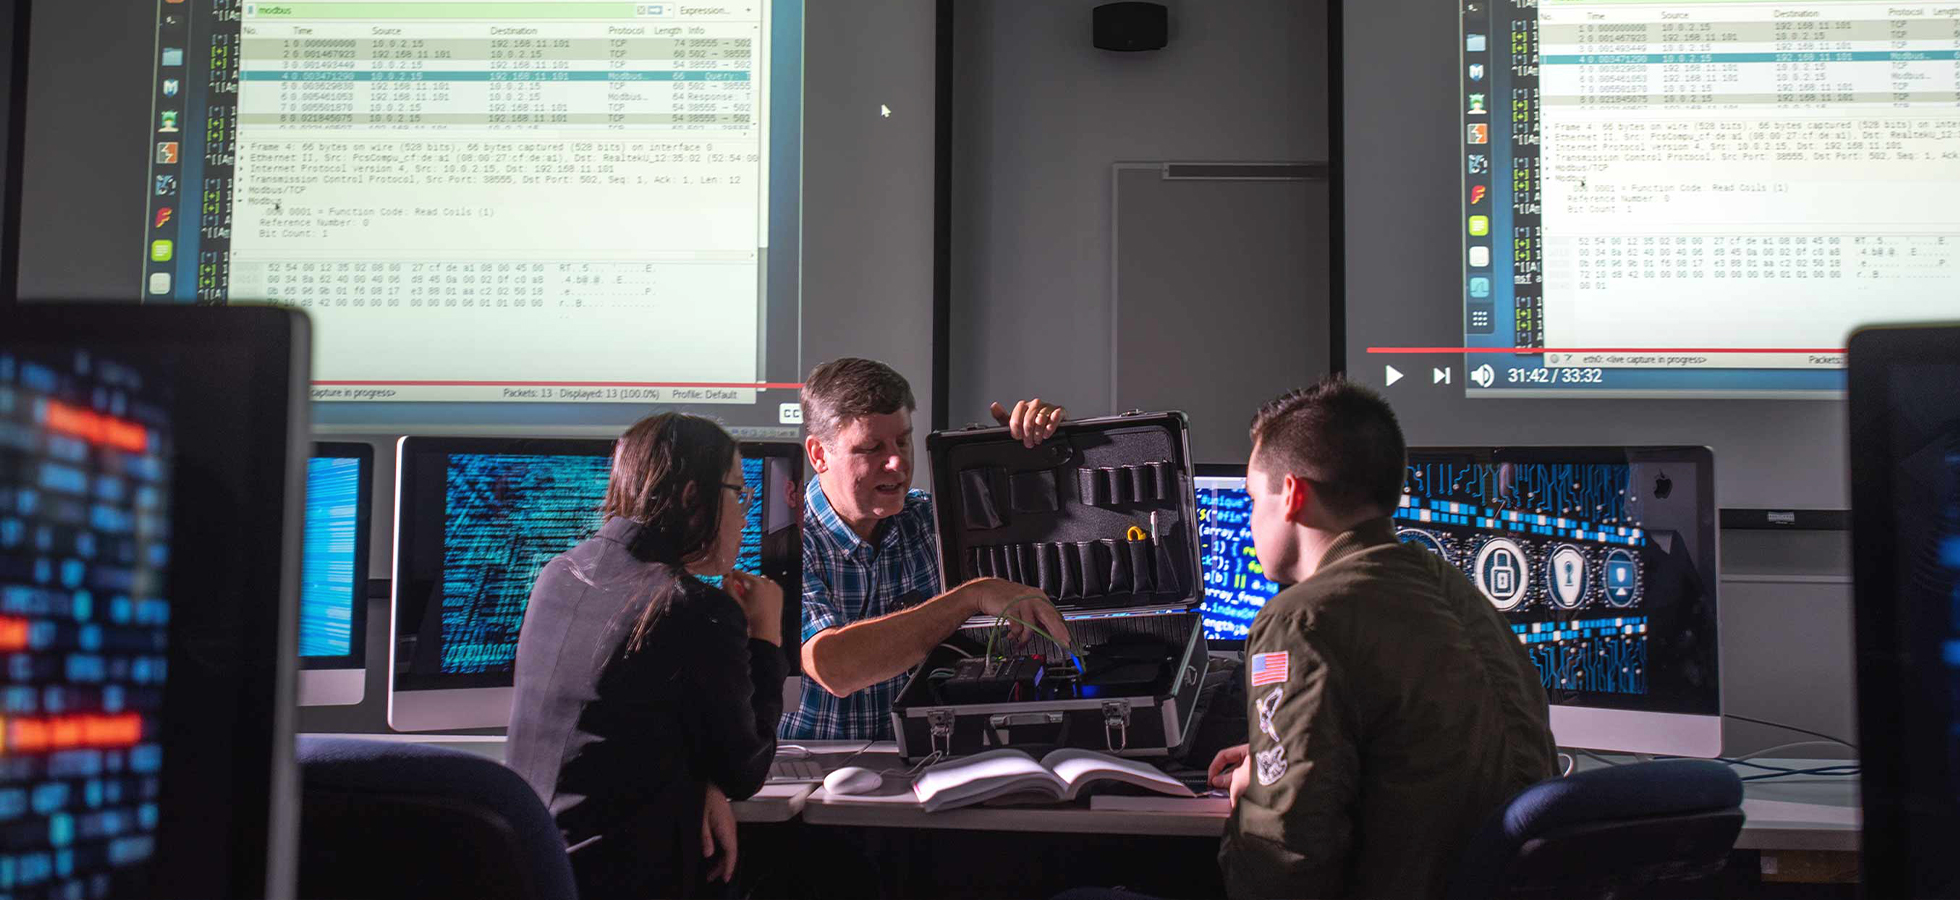 Assumption University Cybersecurity Program Validated by U.S. National Security Agency